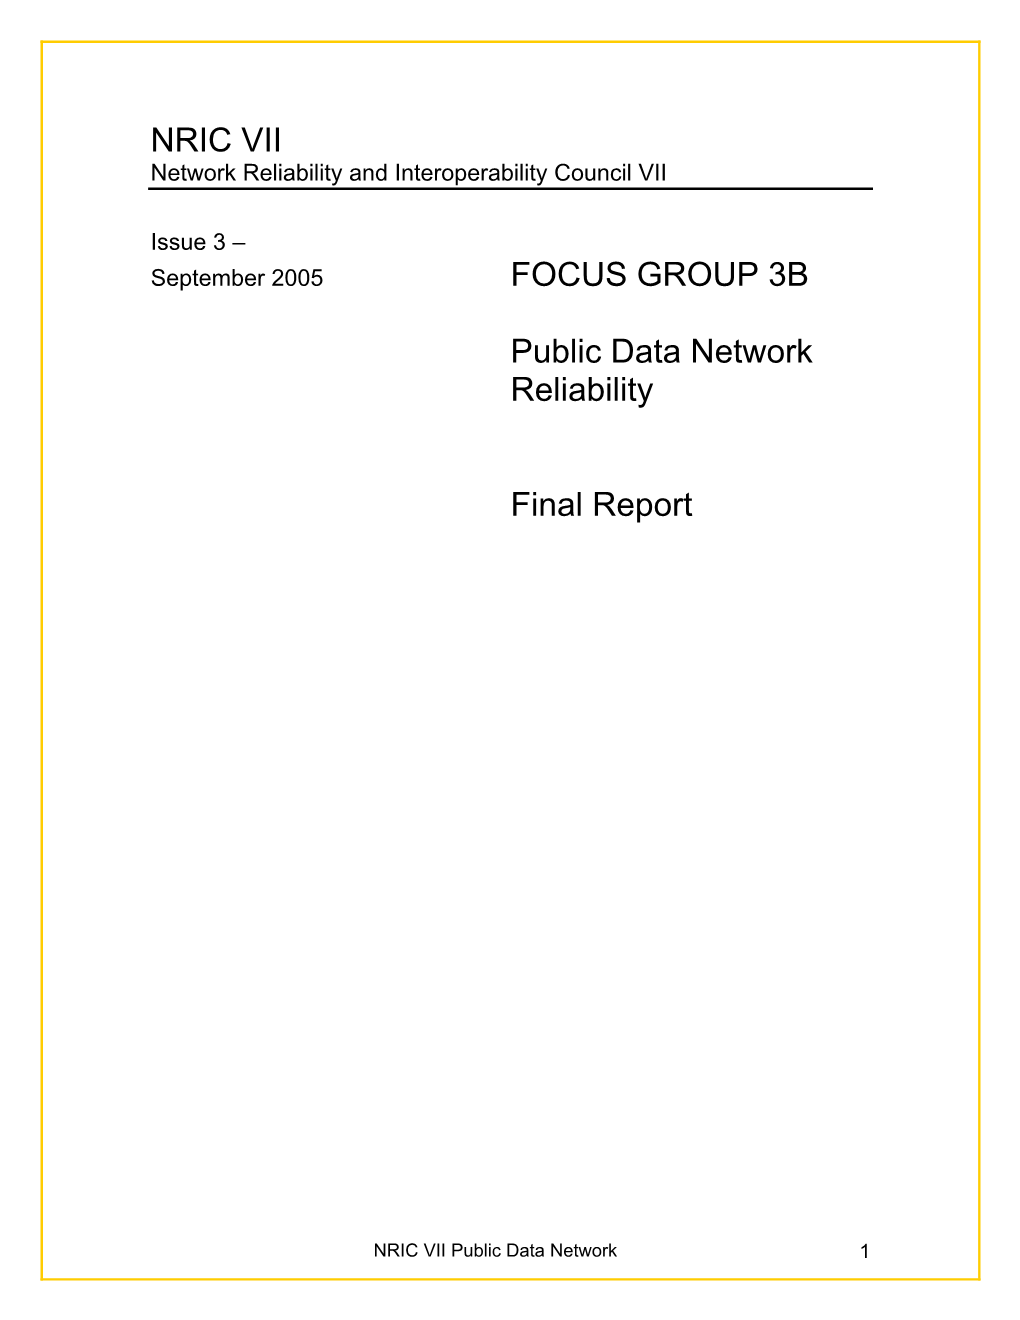 NRIC VII FOCUS GROUP 3B Public Data Network Reliability Final Report